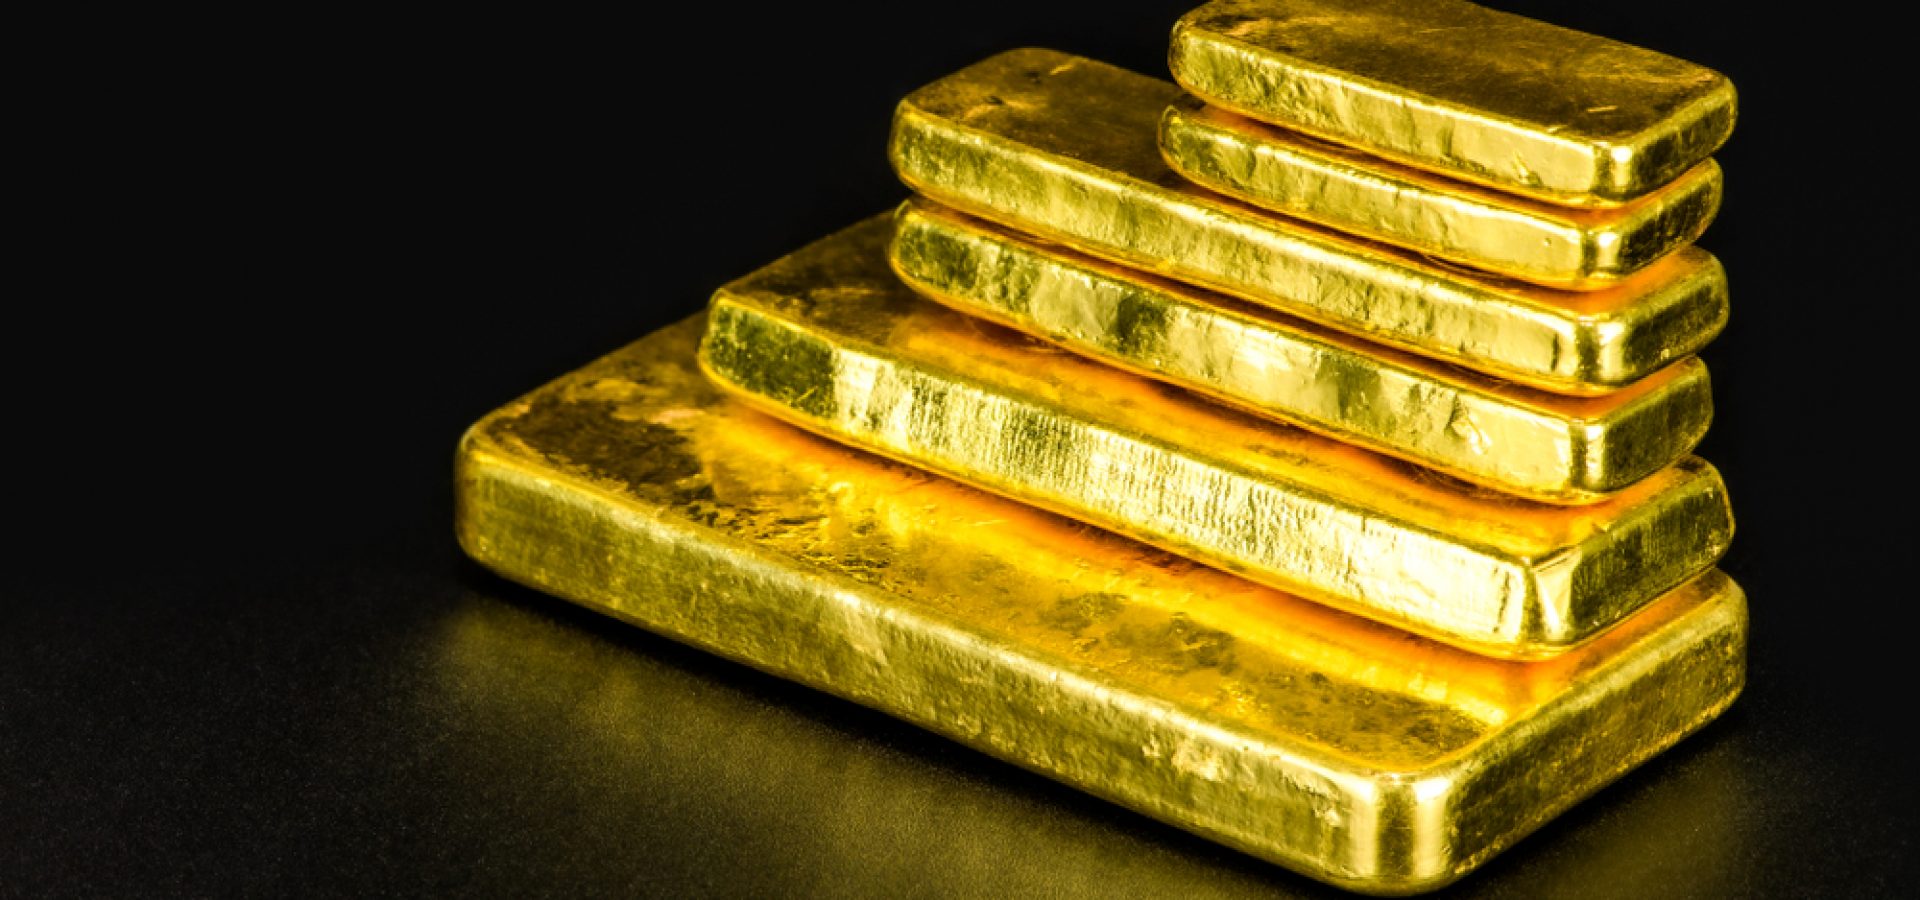 Wibest – Spot gold prices: Gold bars stacked up.